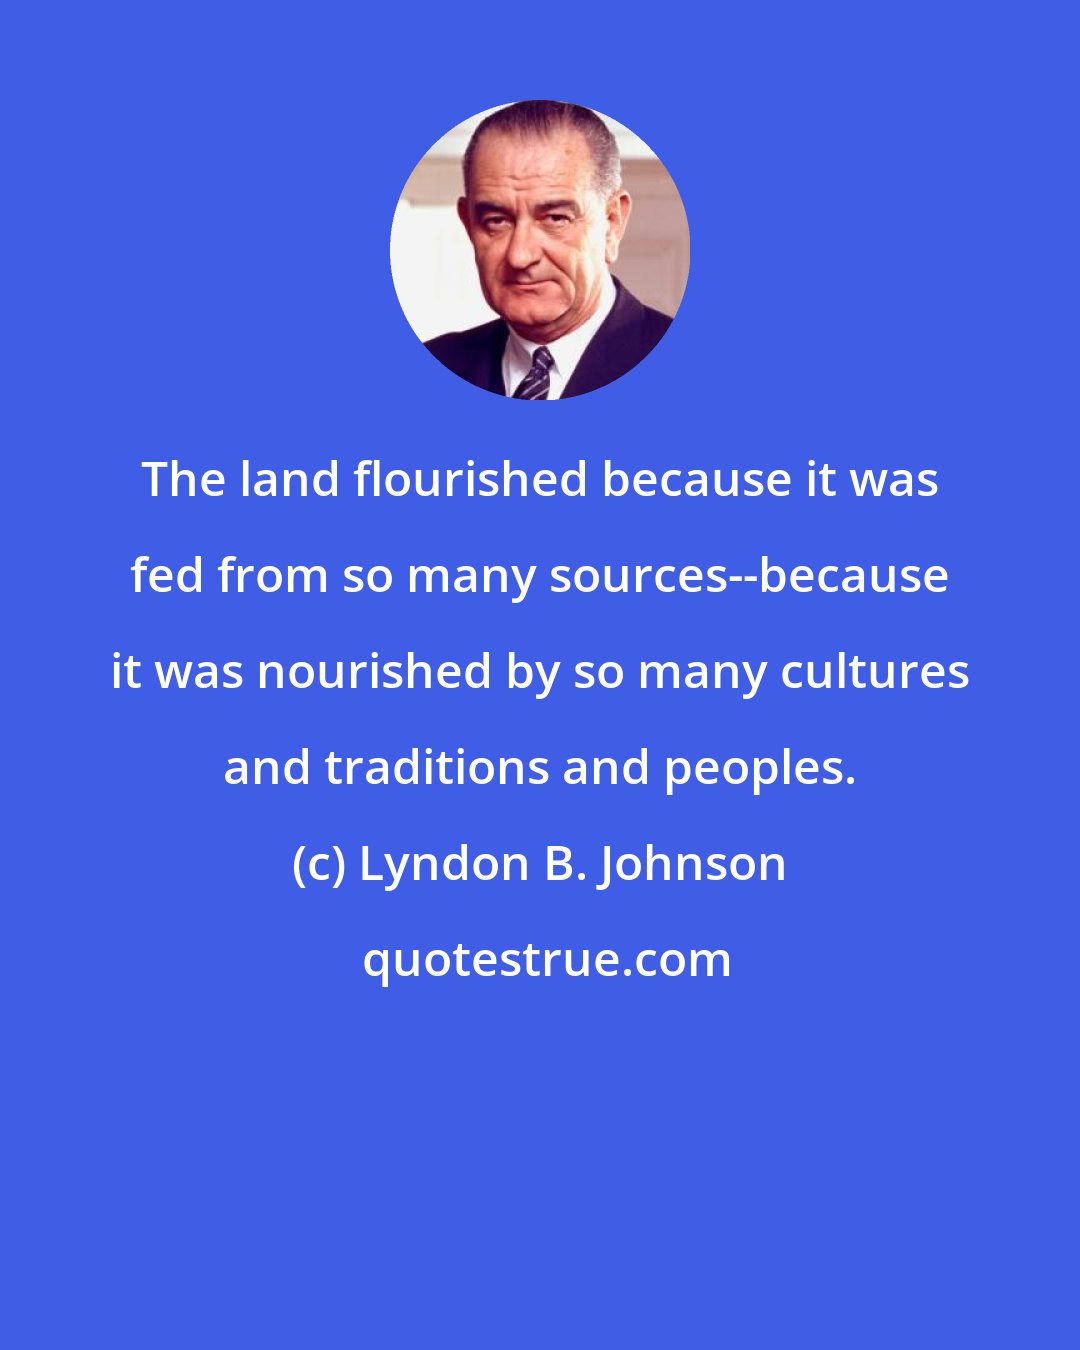 Lyndon B. Johnson: The land flourished because it was fed from so many sources--because it was nourished by so many cultures and traditions and peoples.